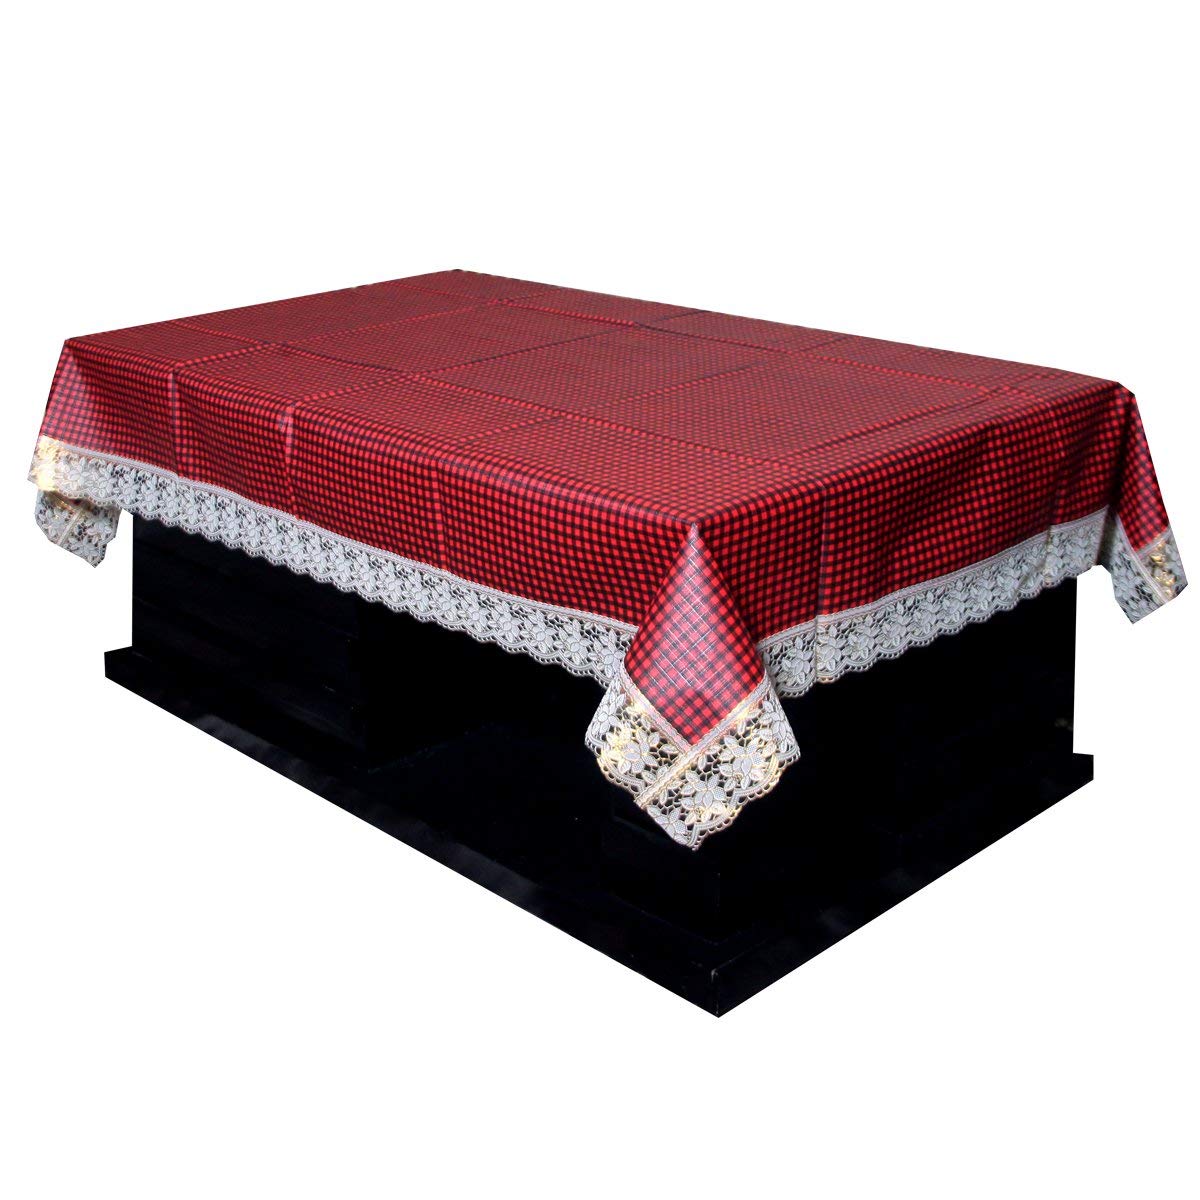 Kuber Industries PVC 6 Seater Dining Table Cover Set (Maroon, 60 Inch X 90 Inch or 152 cm x 229 cm)